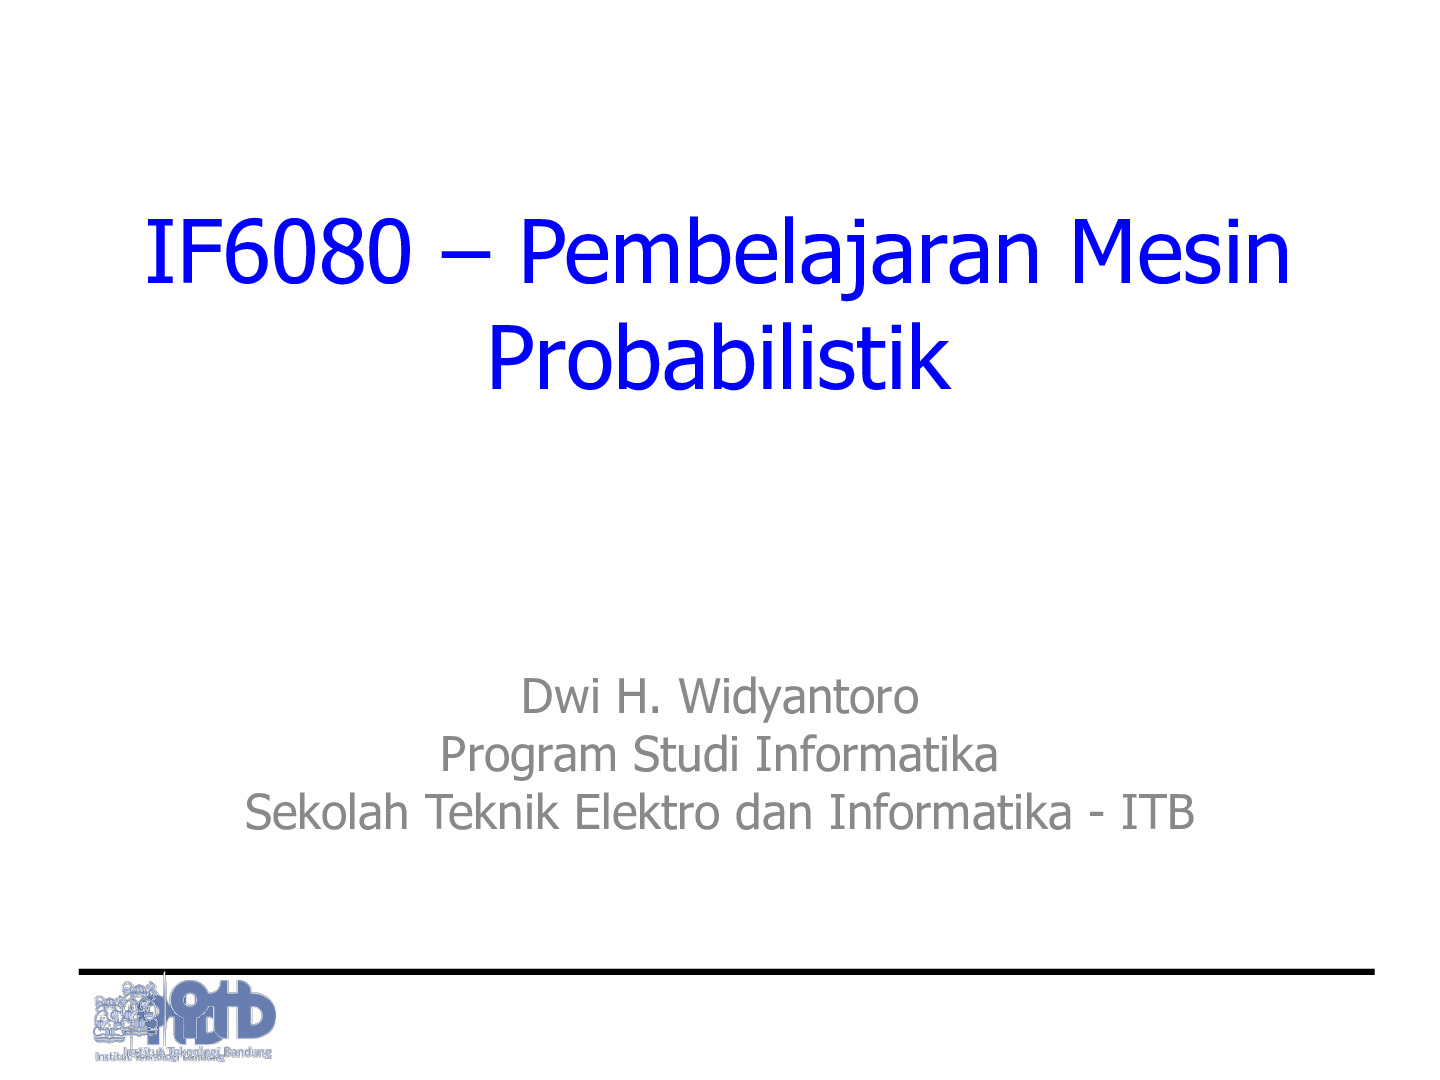 IF5180 Course Introduction